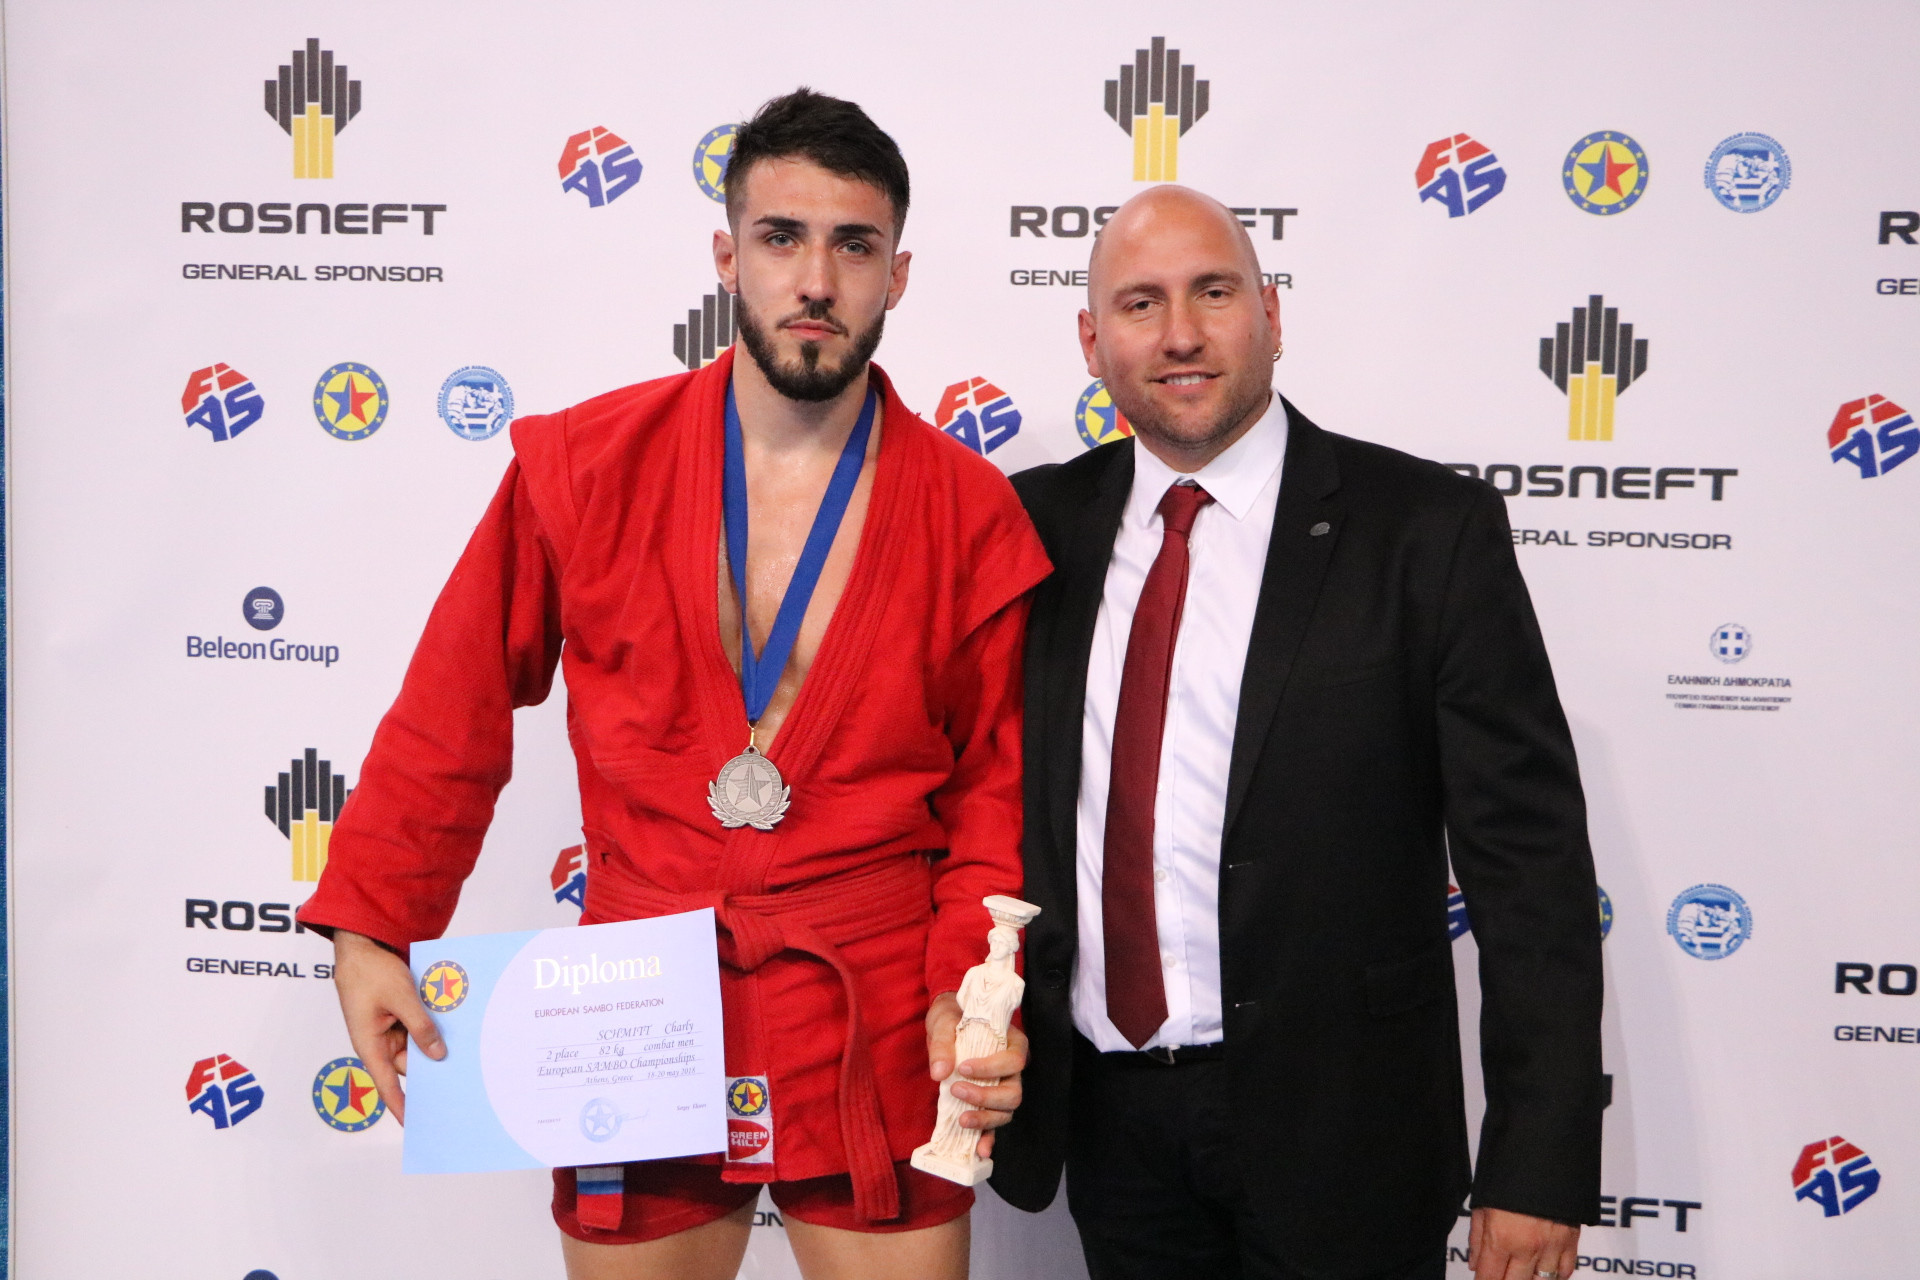 France's Charly Schmitt produced an impressive silver medal-winning performance in the combat men's 82kg category ©FIAS